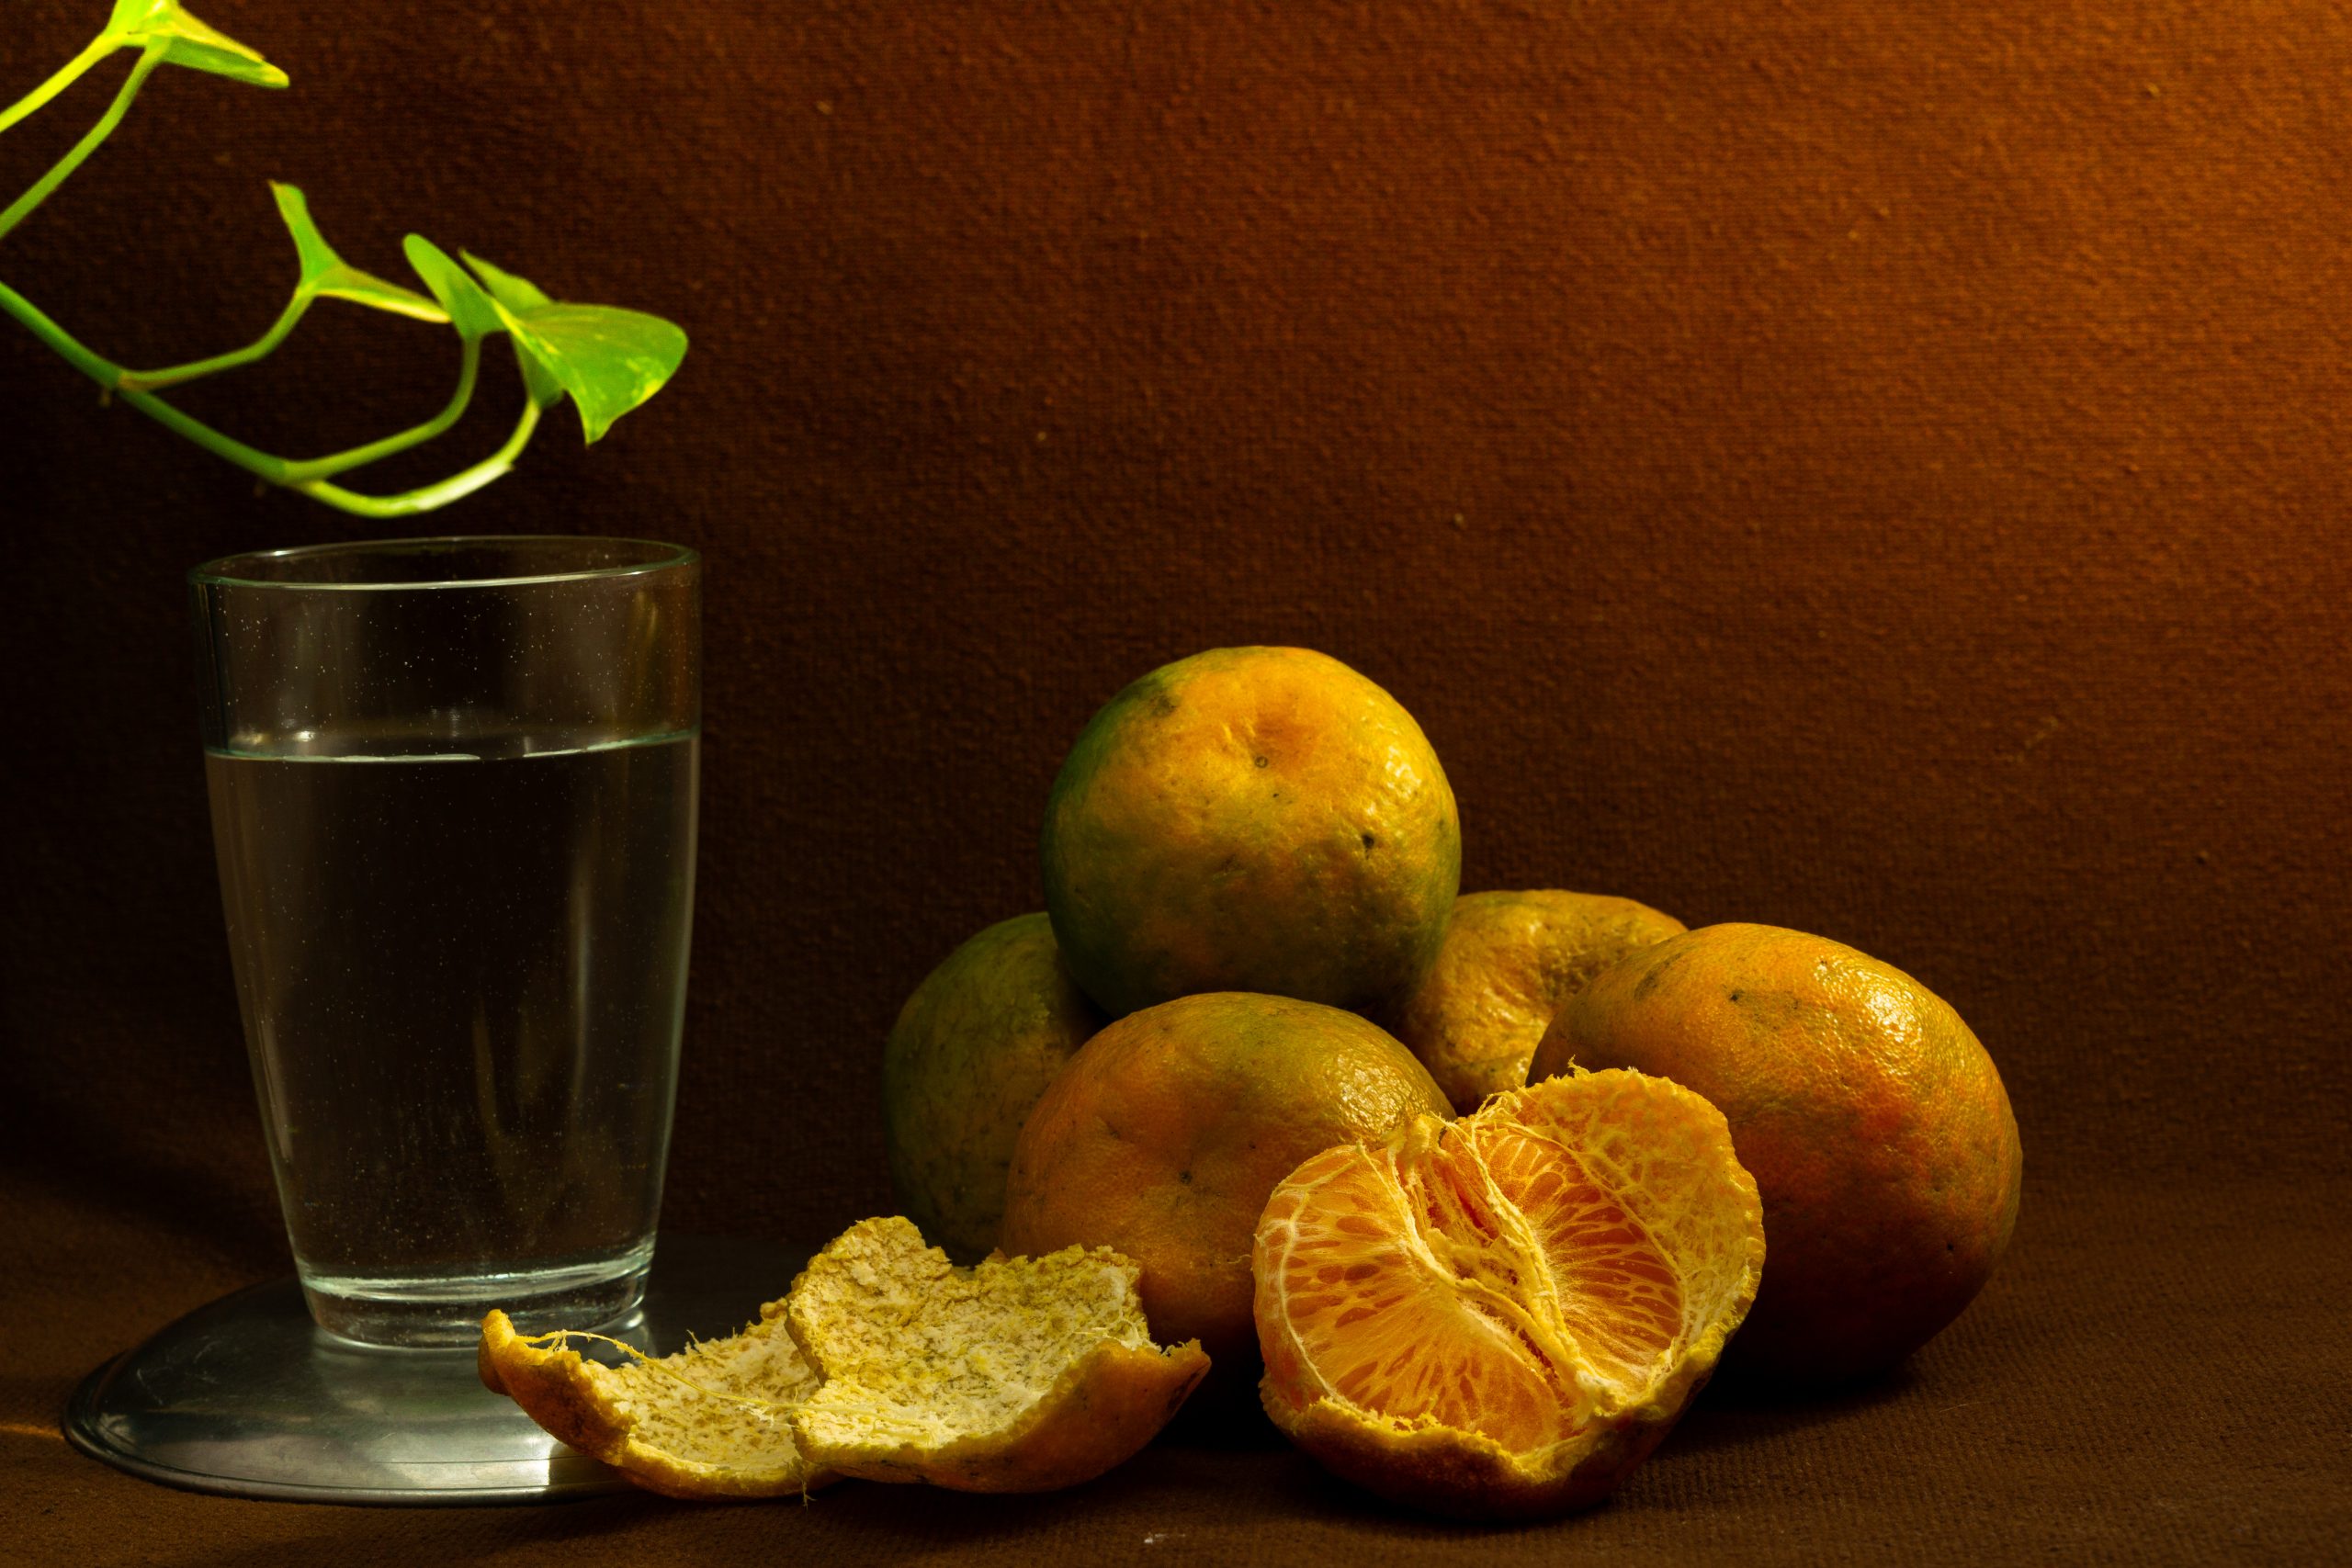 Fresh oranges and glass of water